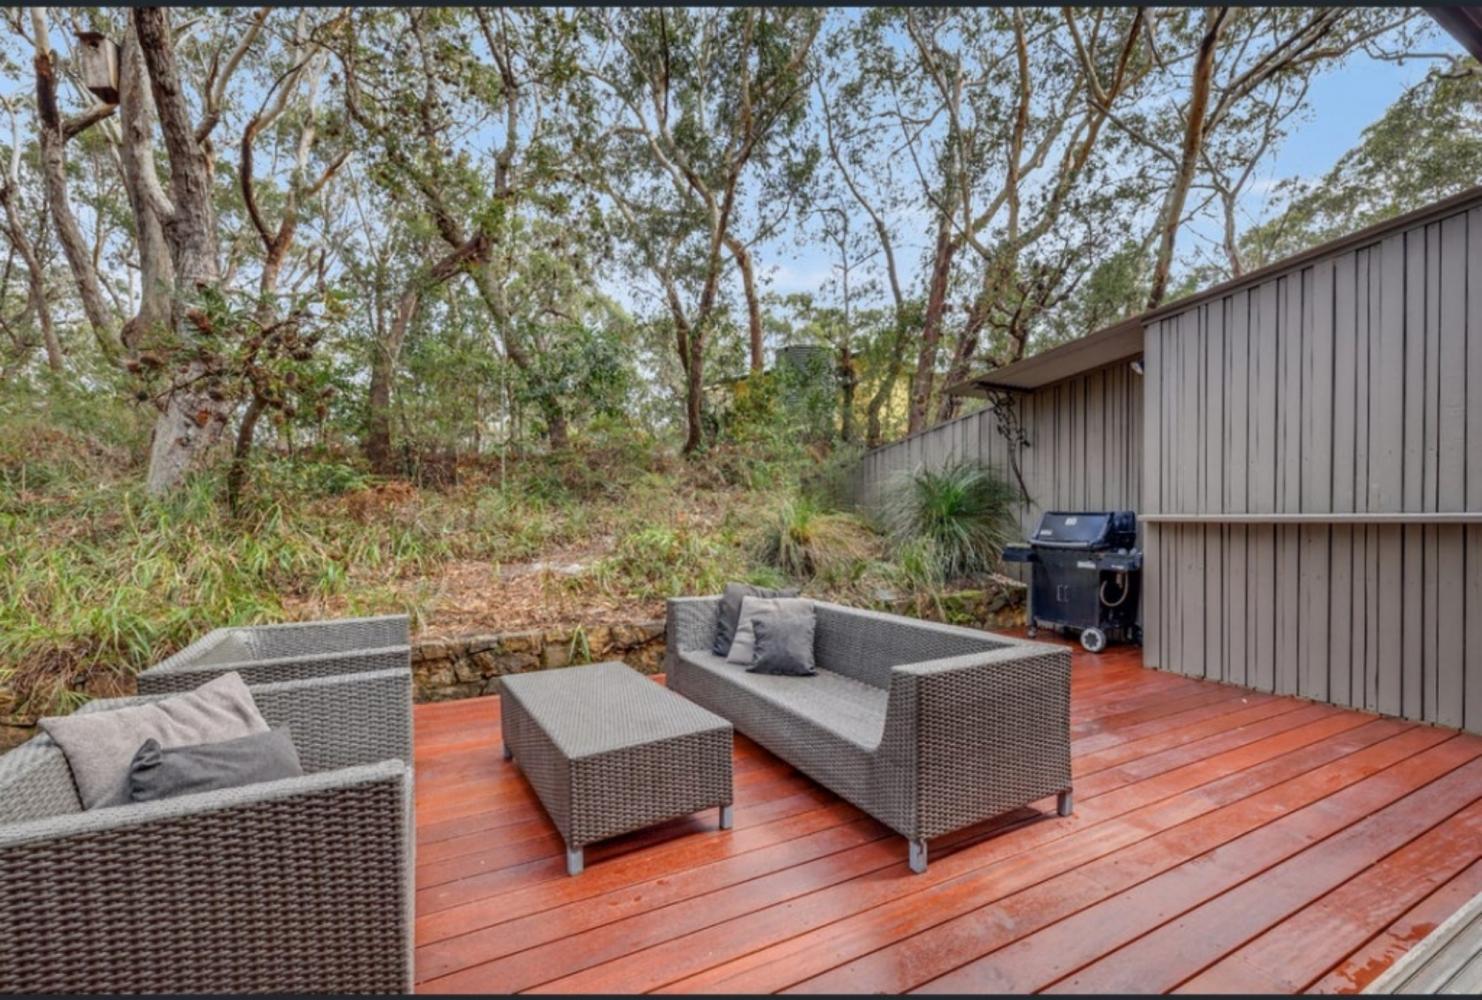 outdoor living area with seating and BBQ for relaxing surrounded by natural forest